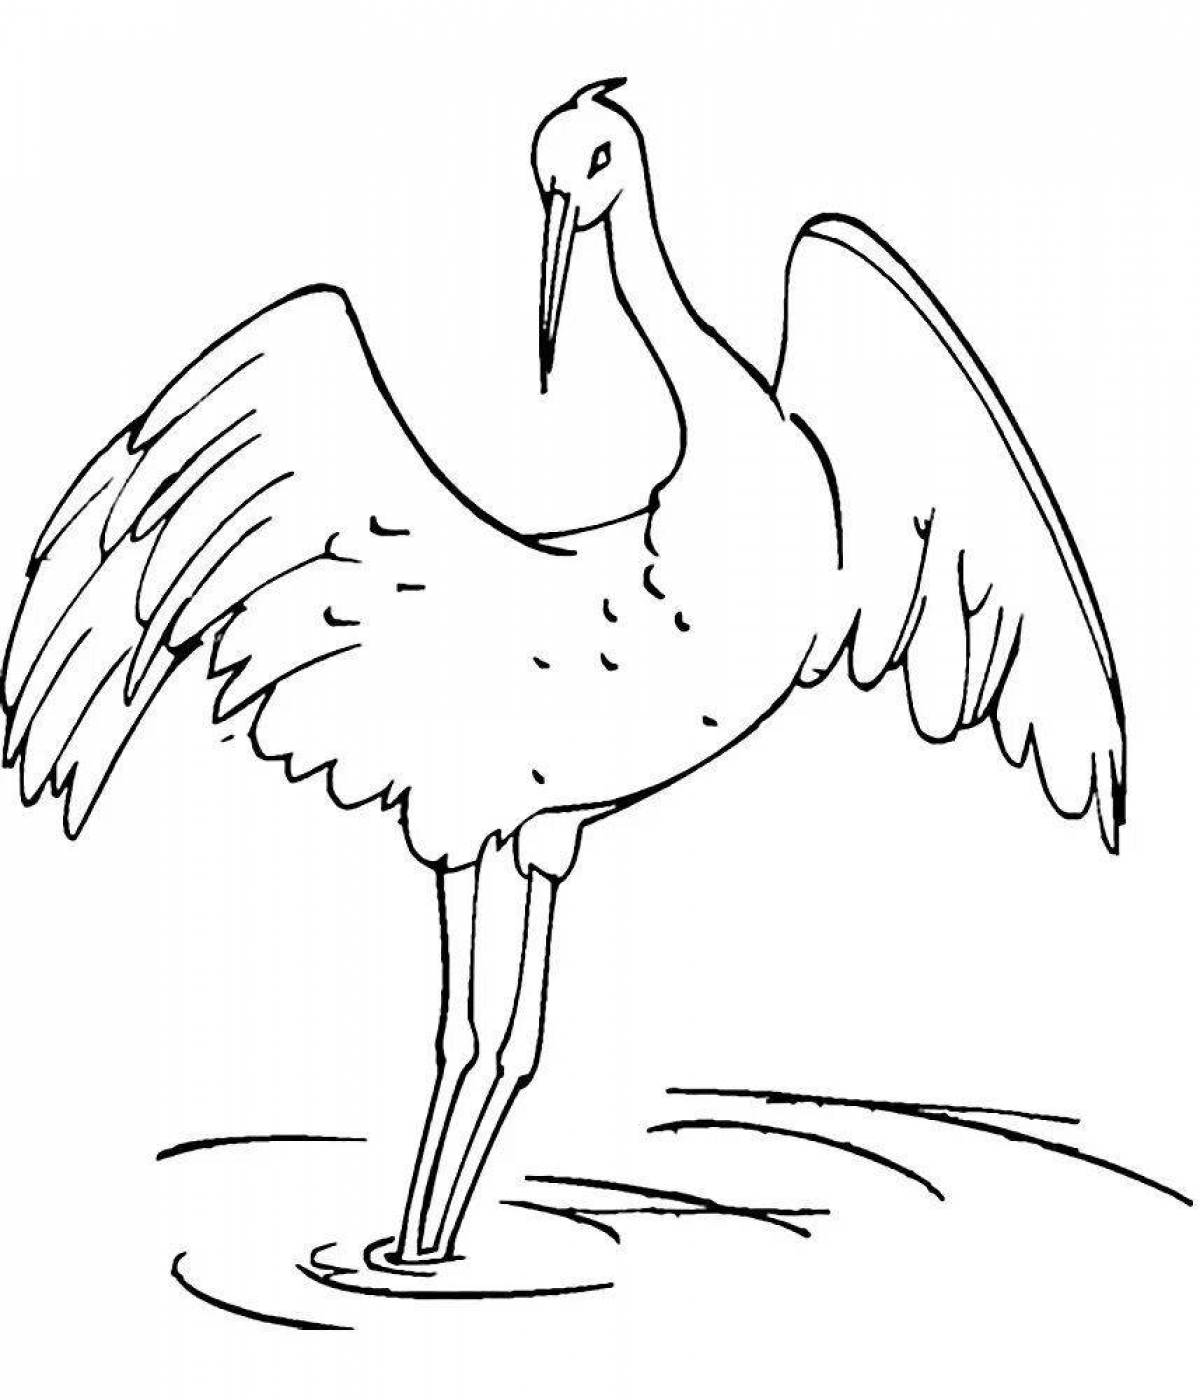 Coloring pages big crane for kids